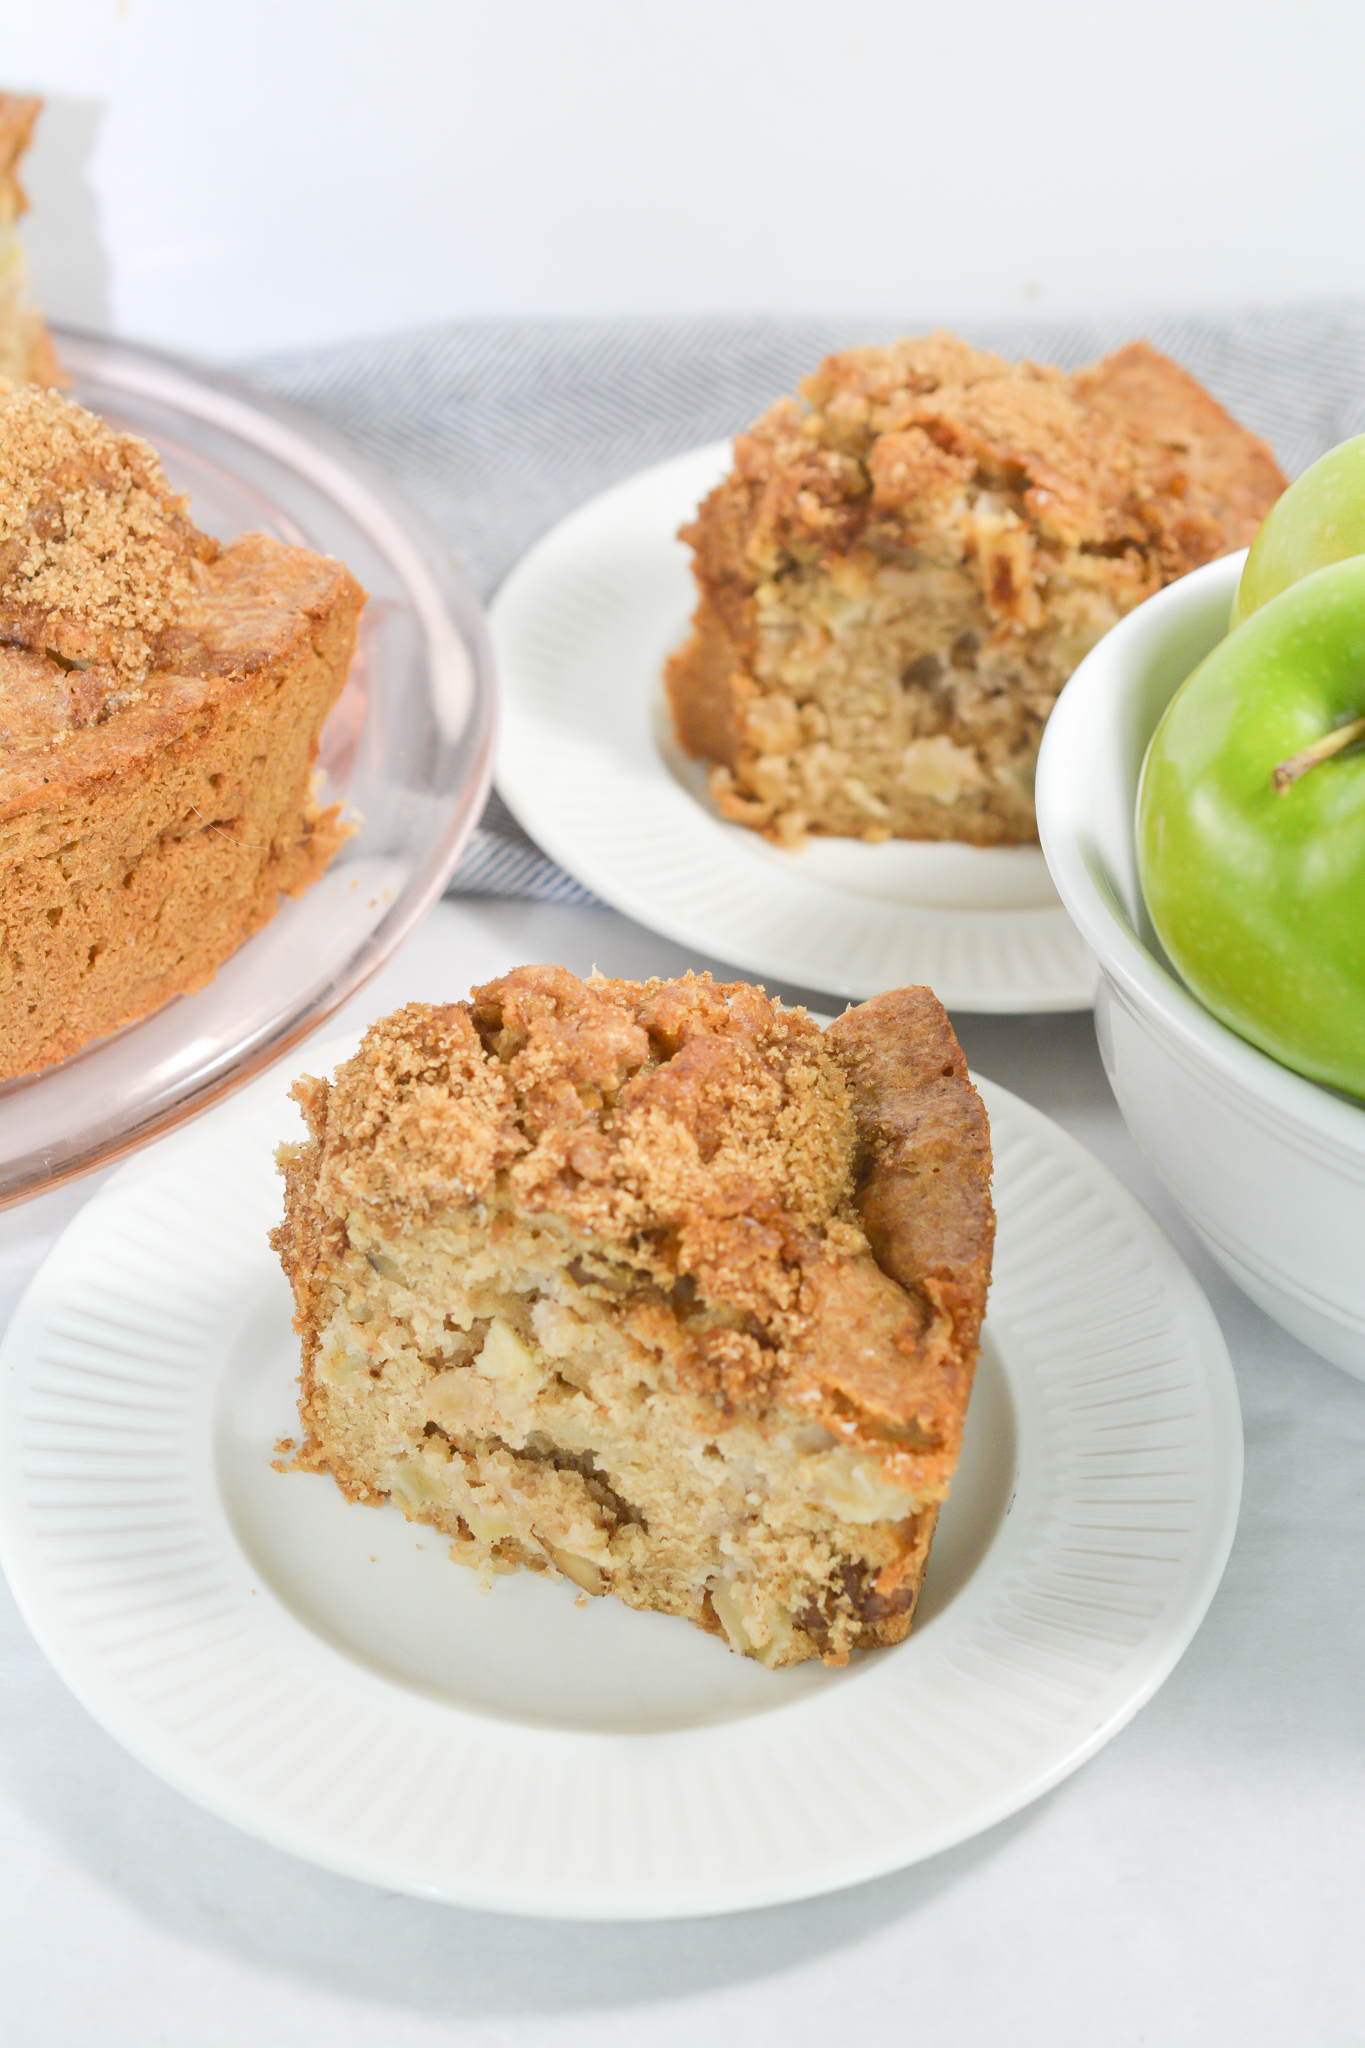 Two slices of the Apple Tea Cake.